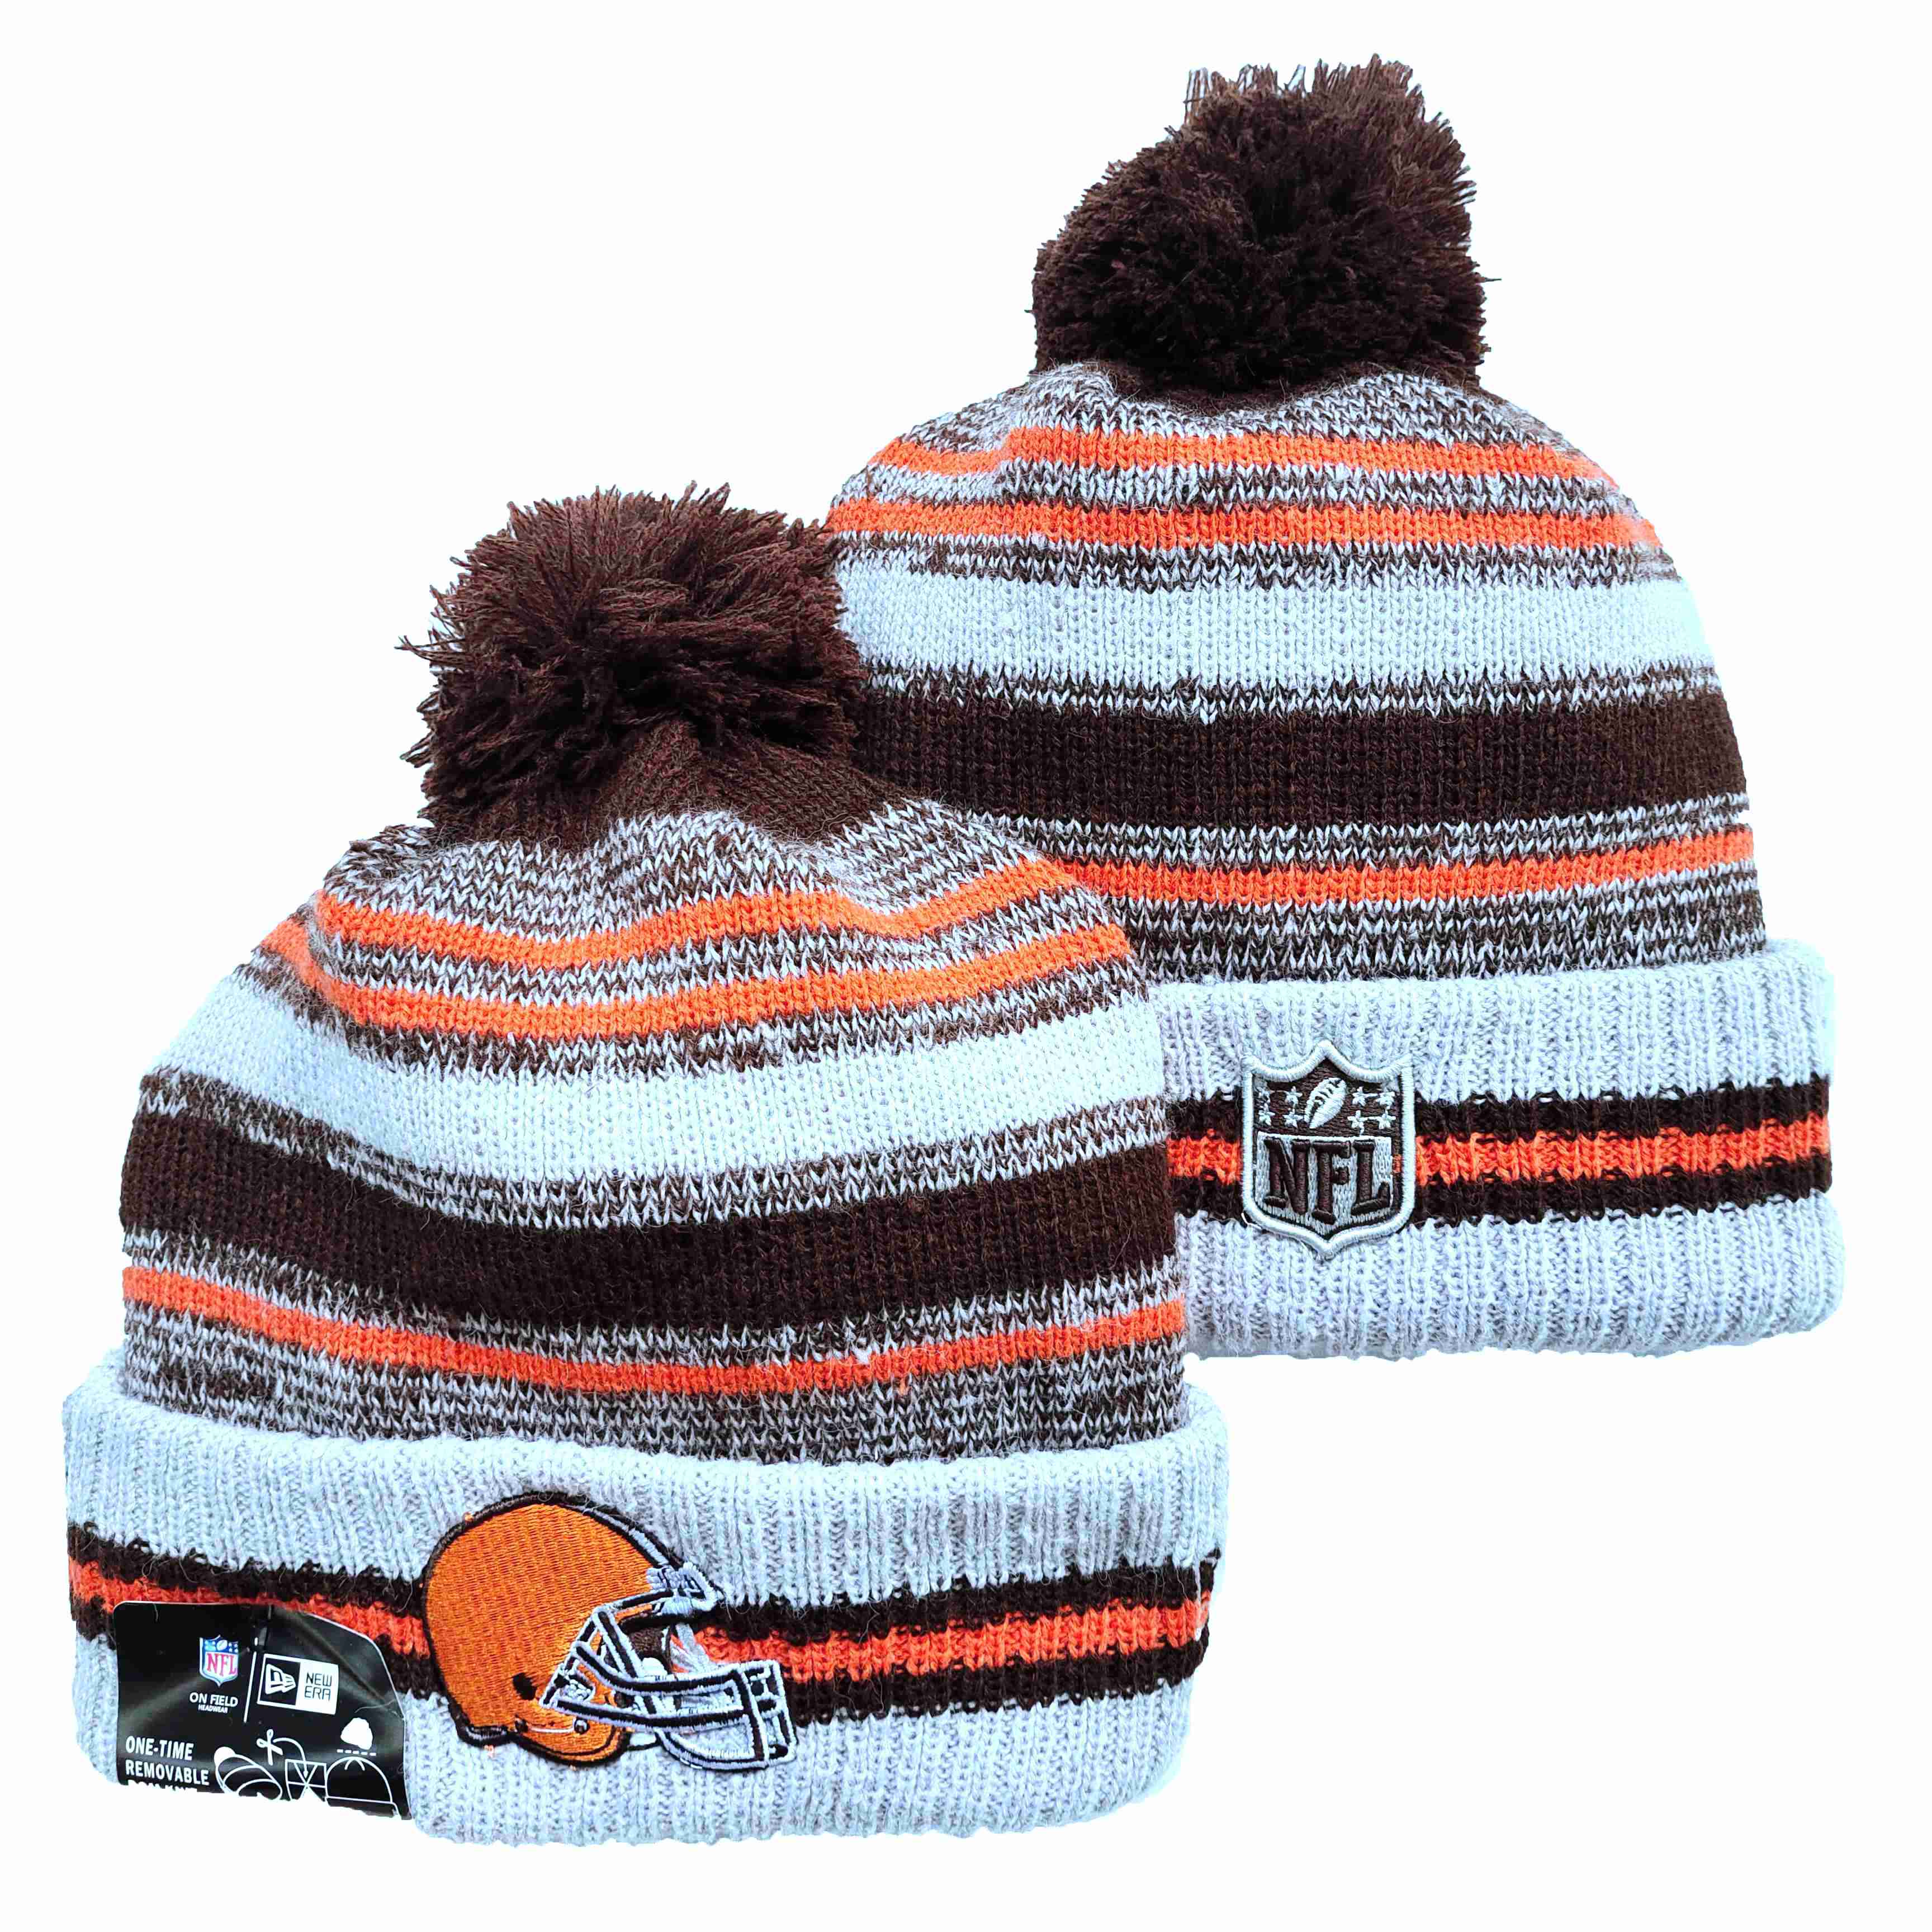 Cleveland Browns Knit Hats -13